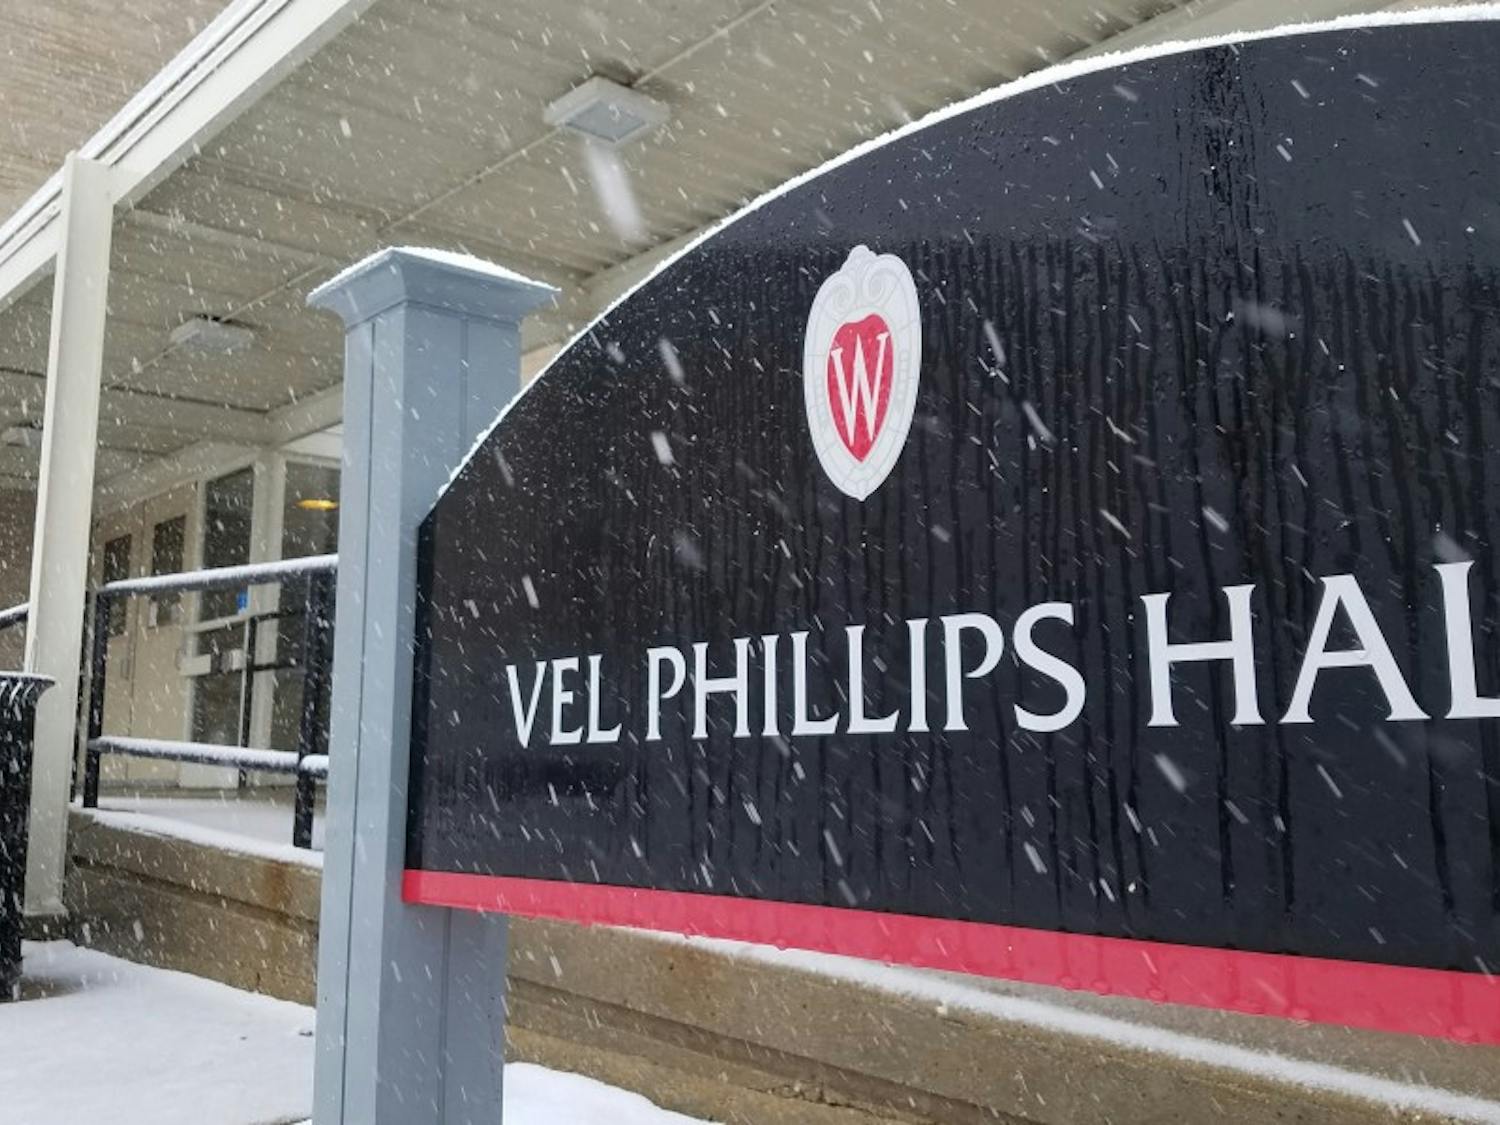 Vel Phillips Residence Hall is named after the late activist.